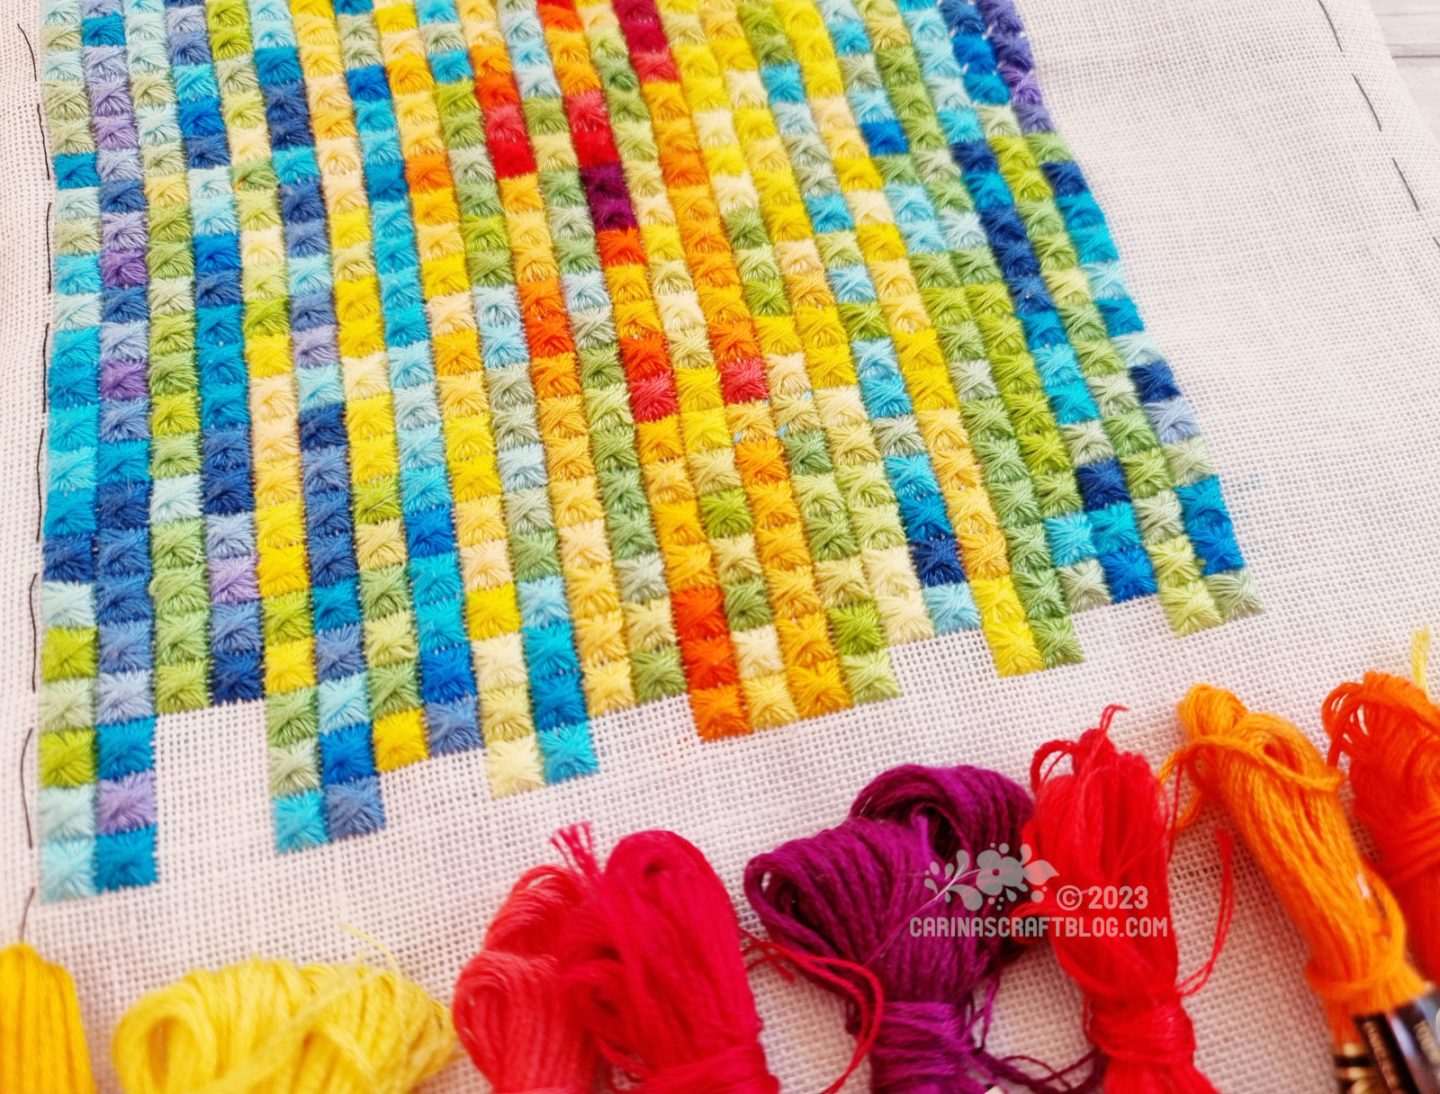 Close view of a  multicolour embroidery made up of rows and columns of square stitches.